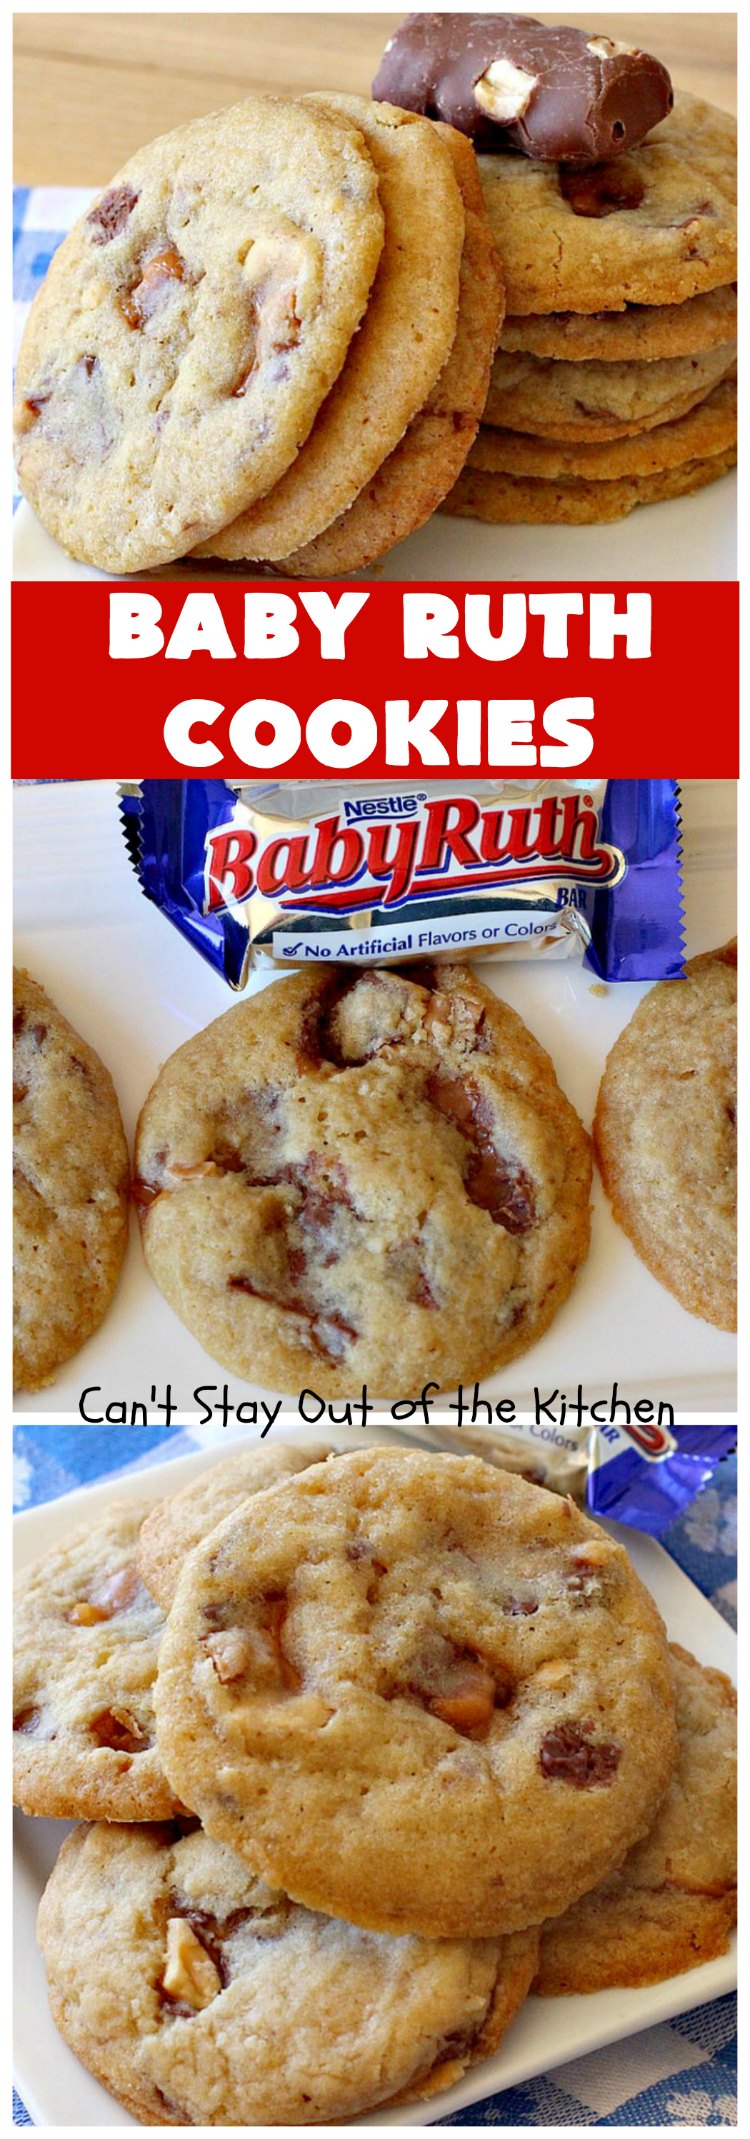 Baby Ruth Cookies | Can't Stay Out of the Kitchen